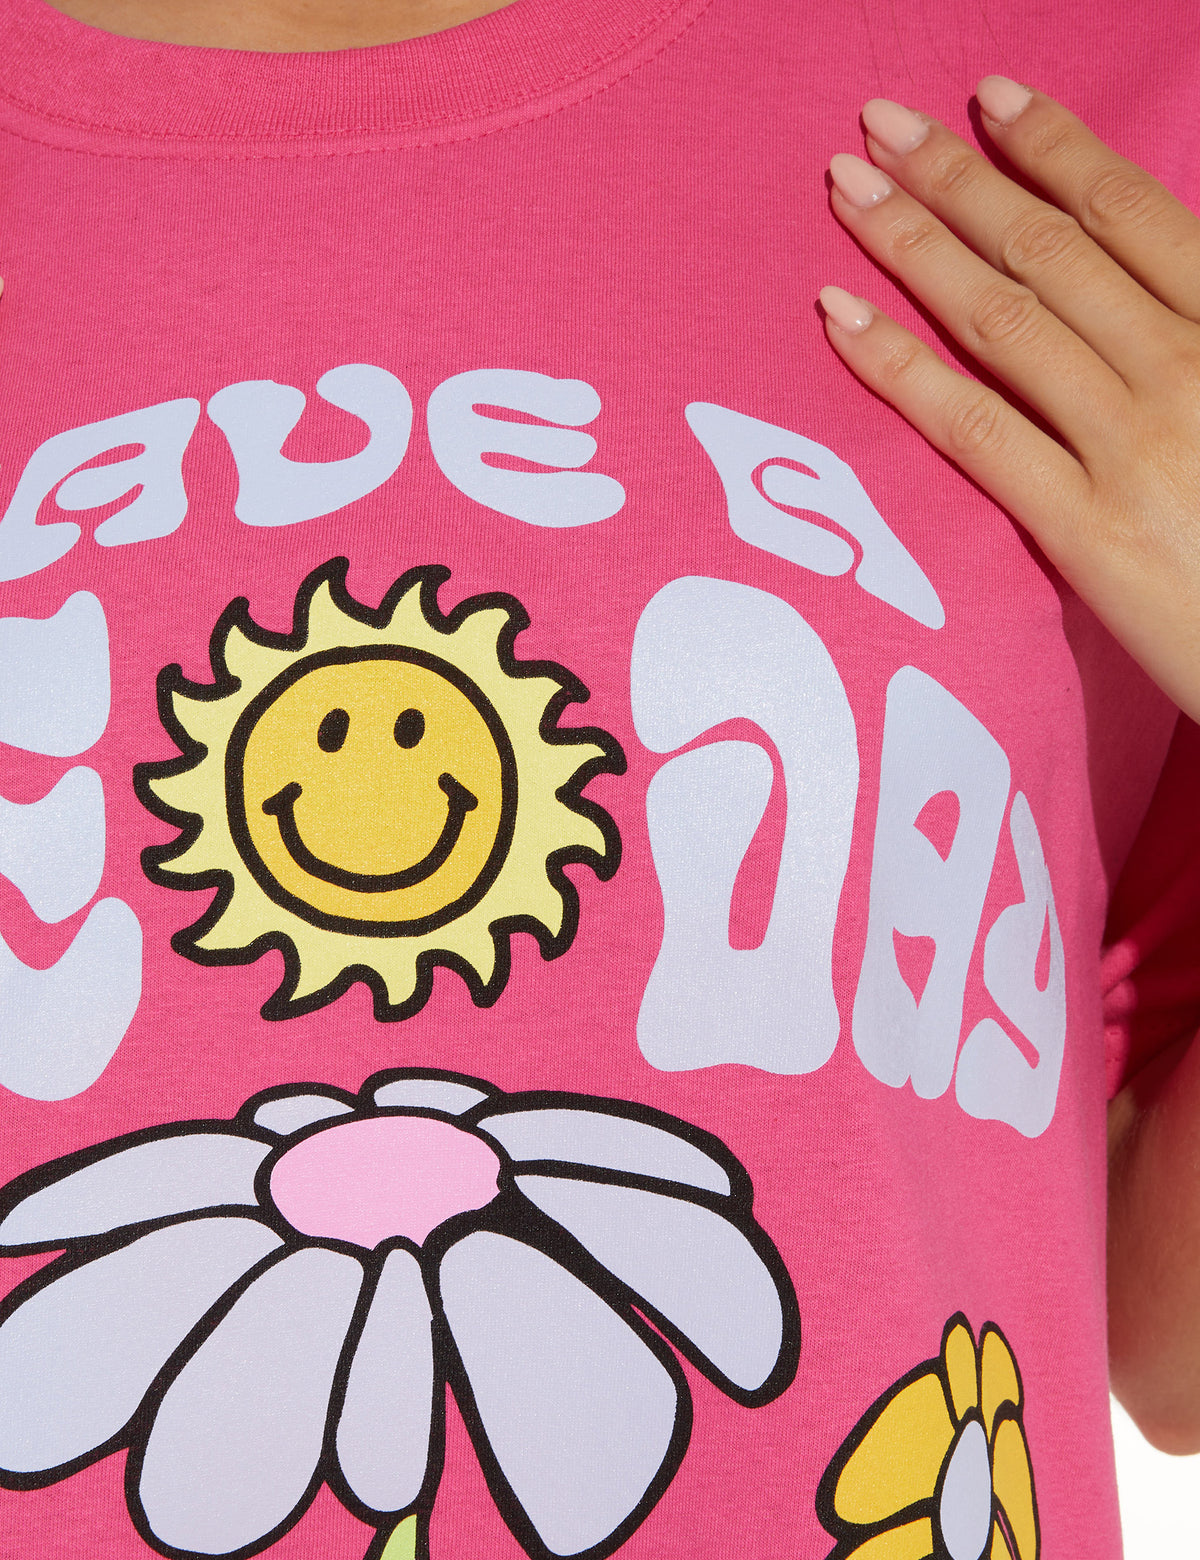 HAVE A NICE DAY PINK TEE